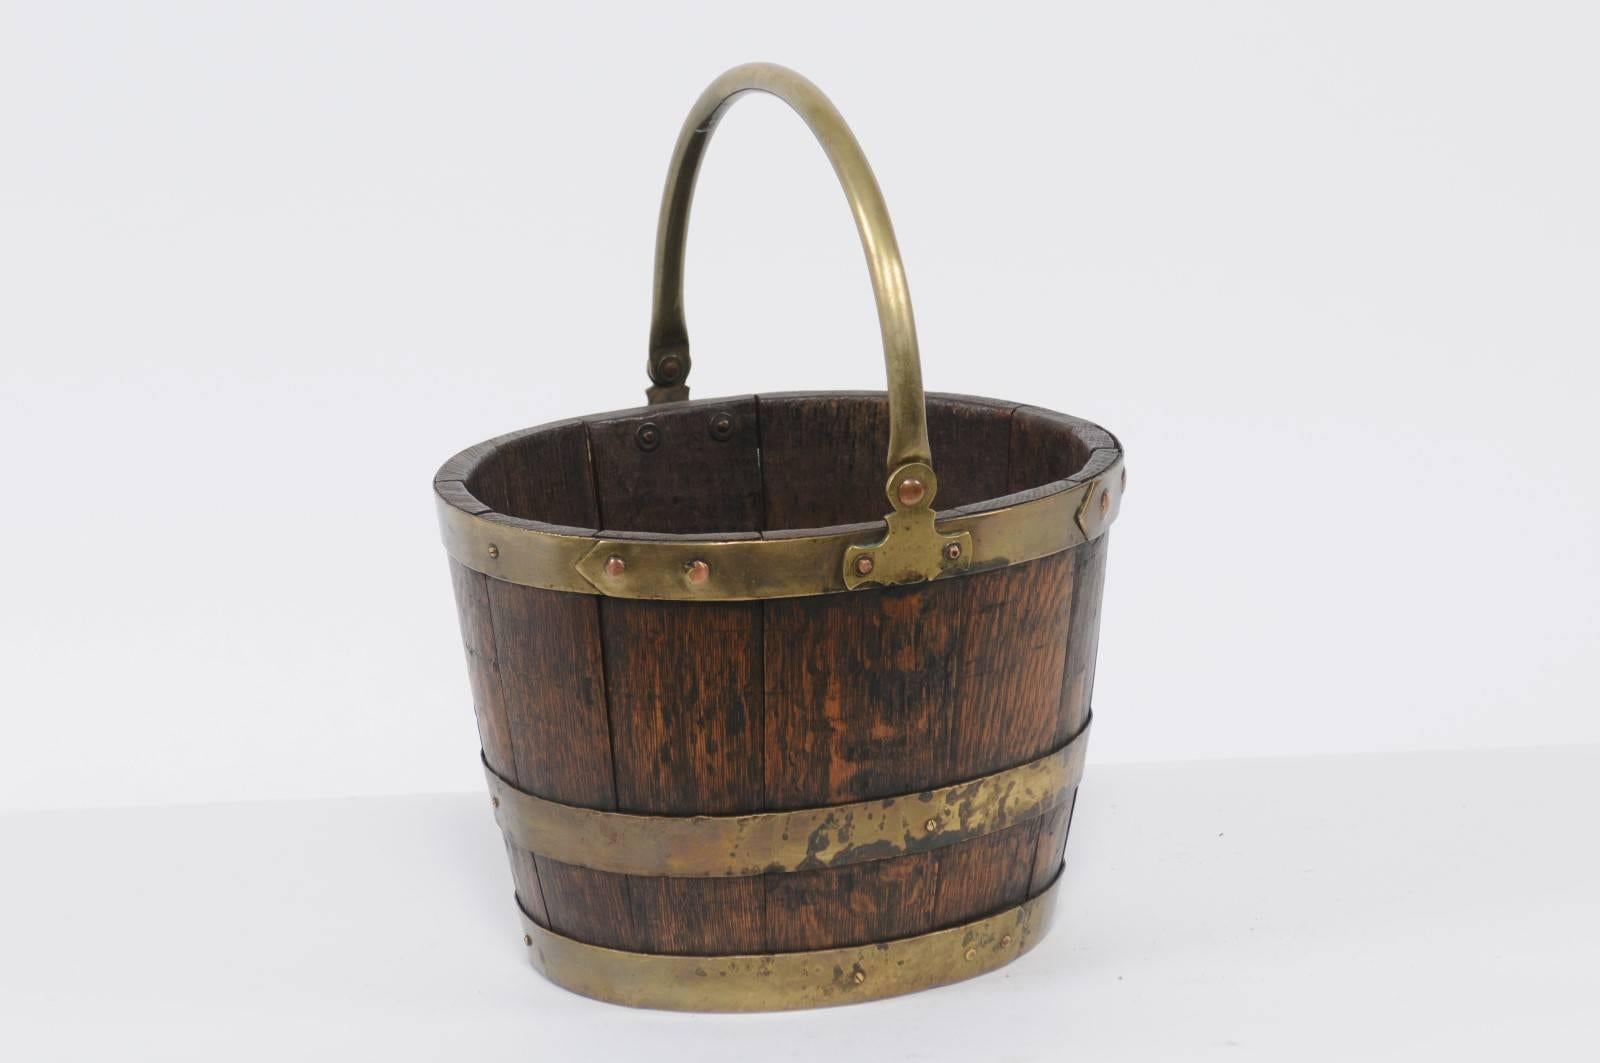 An English oak and brass bucket with loop handle from the late 19th century. This English bucket features a body made of vertical oak slats, strengthened by a series of horizontal brass rings. With its simple clean lines and two colors contrasting